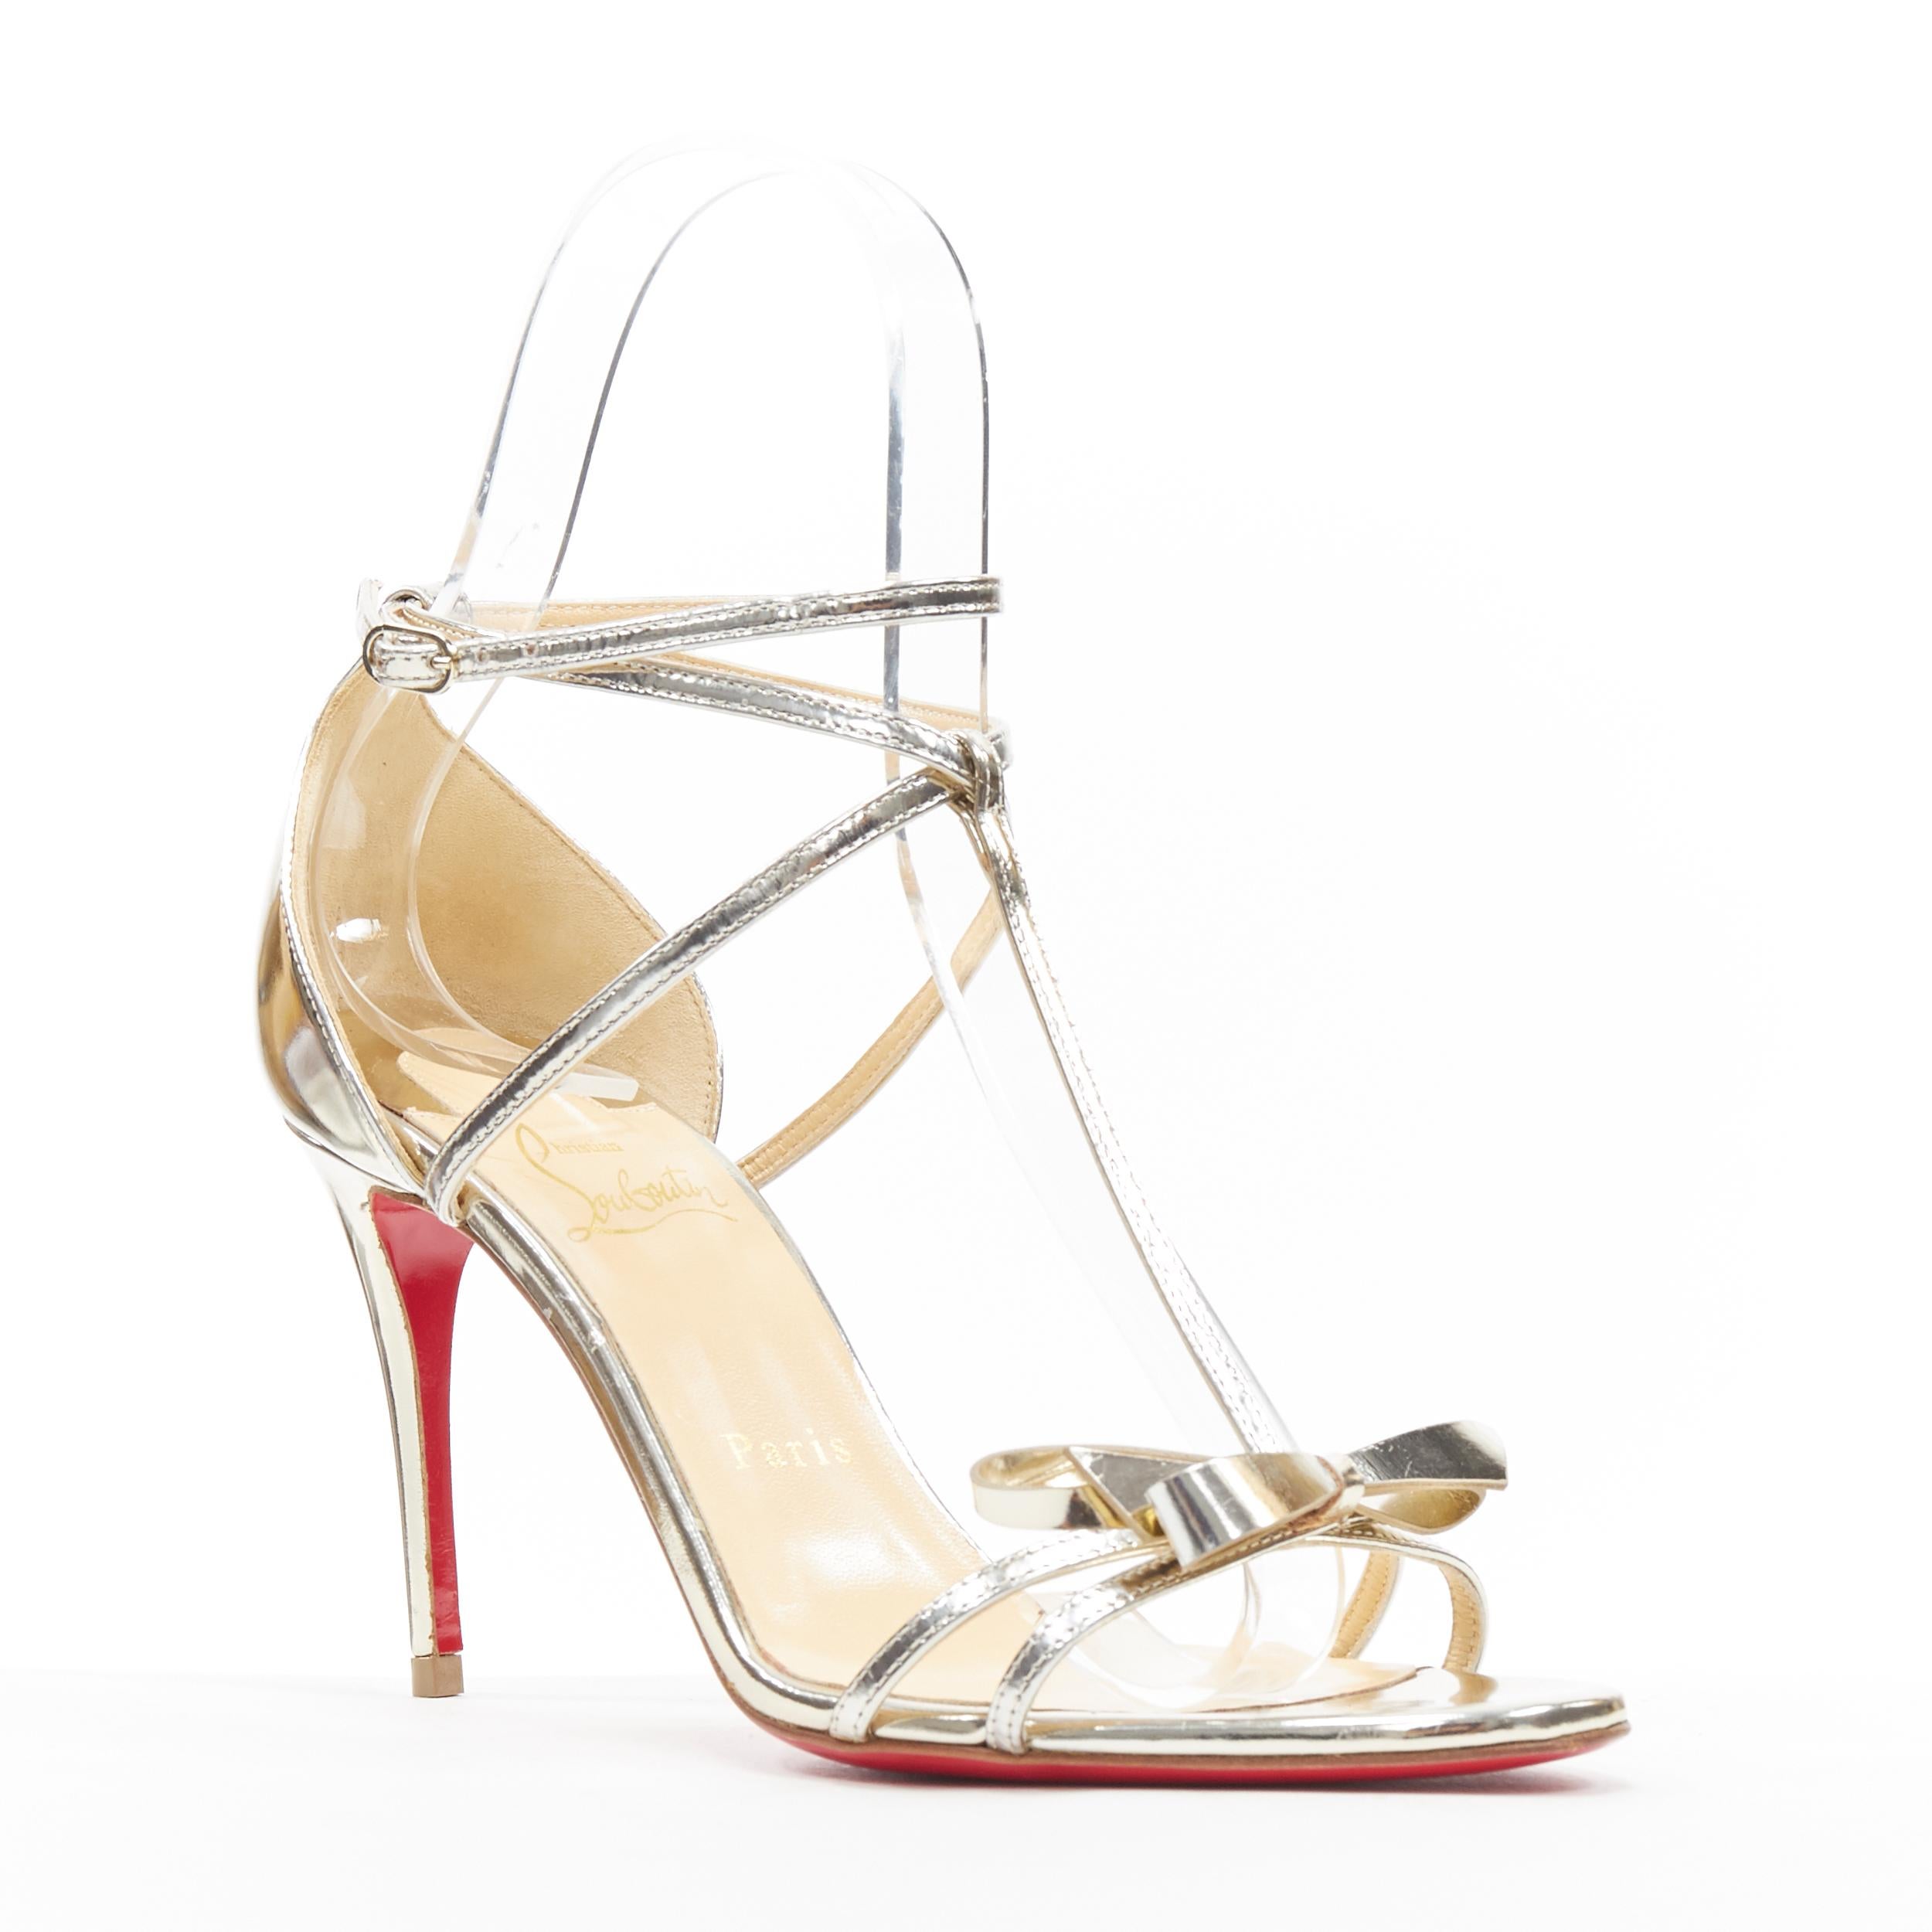 new CHRISTIAN LOUBOUTIN Blakissima metallic silver bow t-strap sandals EU37.5
Brand: Christian Louboutin
Designer: Christian Louboutin
Model Name / Style: Blakissima 
Material: Leather
Color: Gold; metallic champagne gold
Pattern: Solid
Closure: